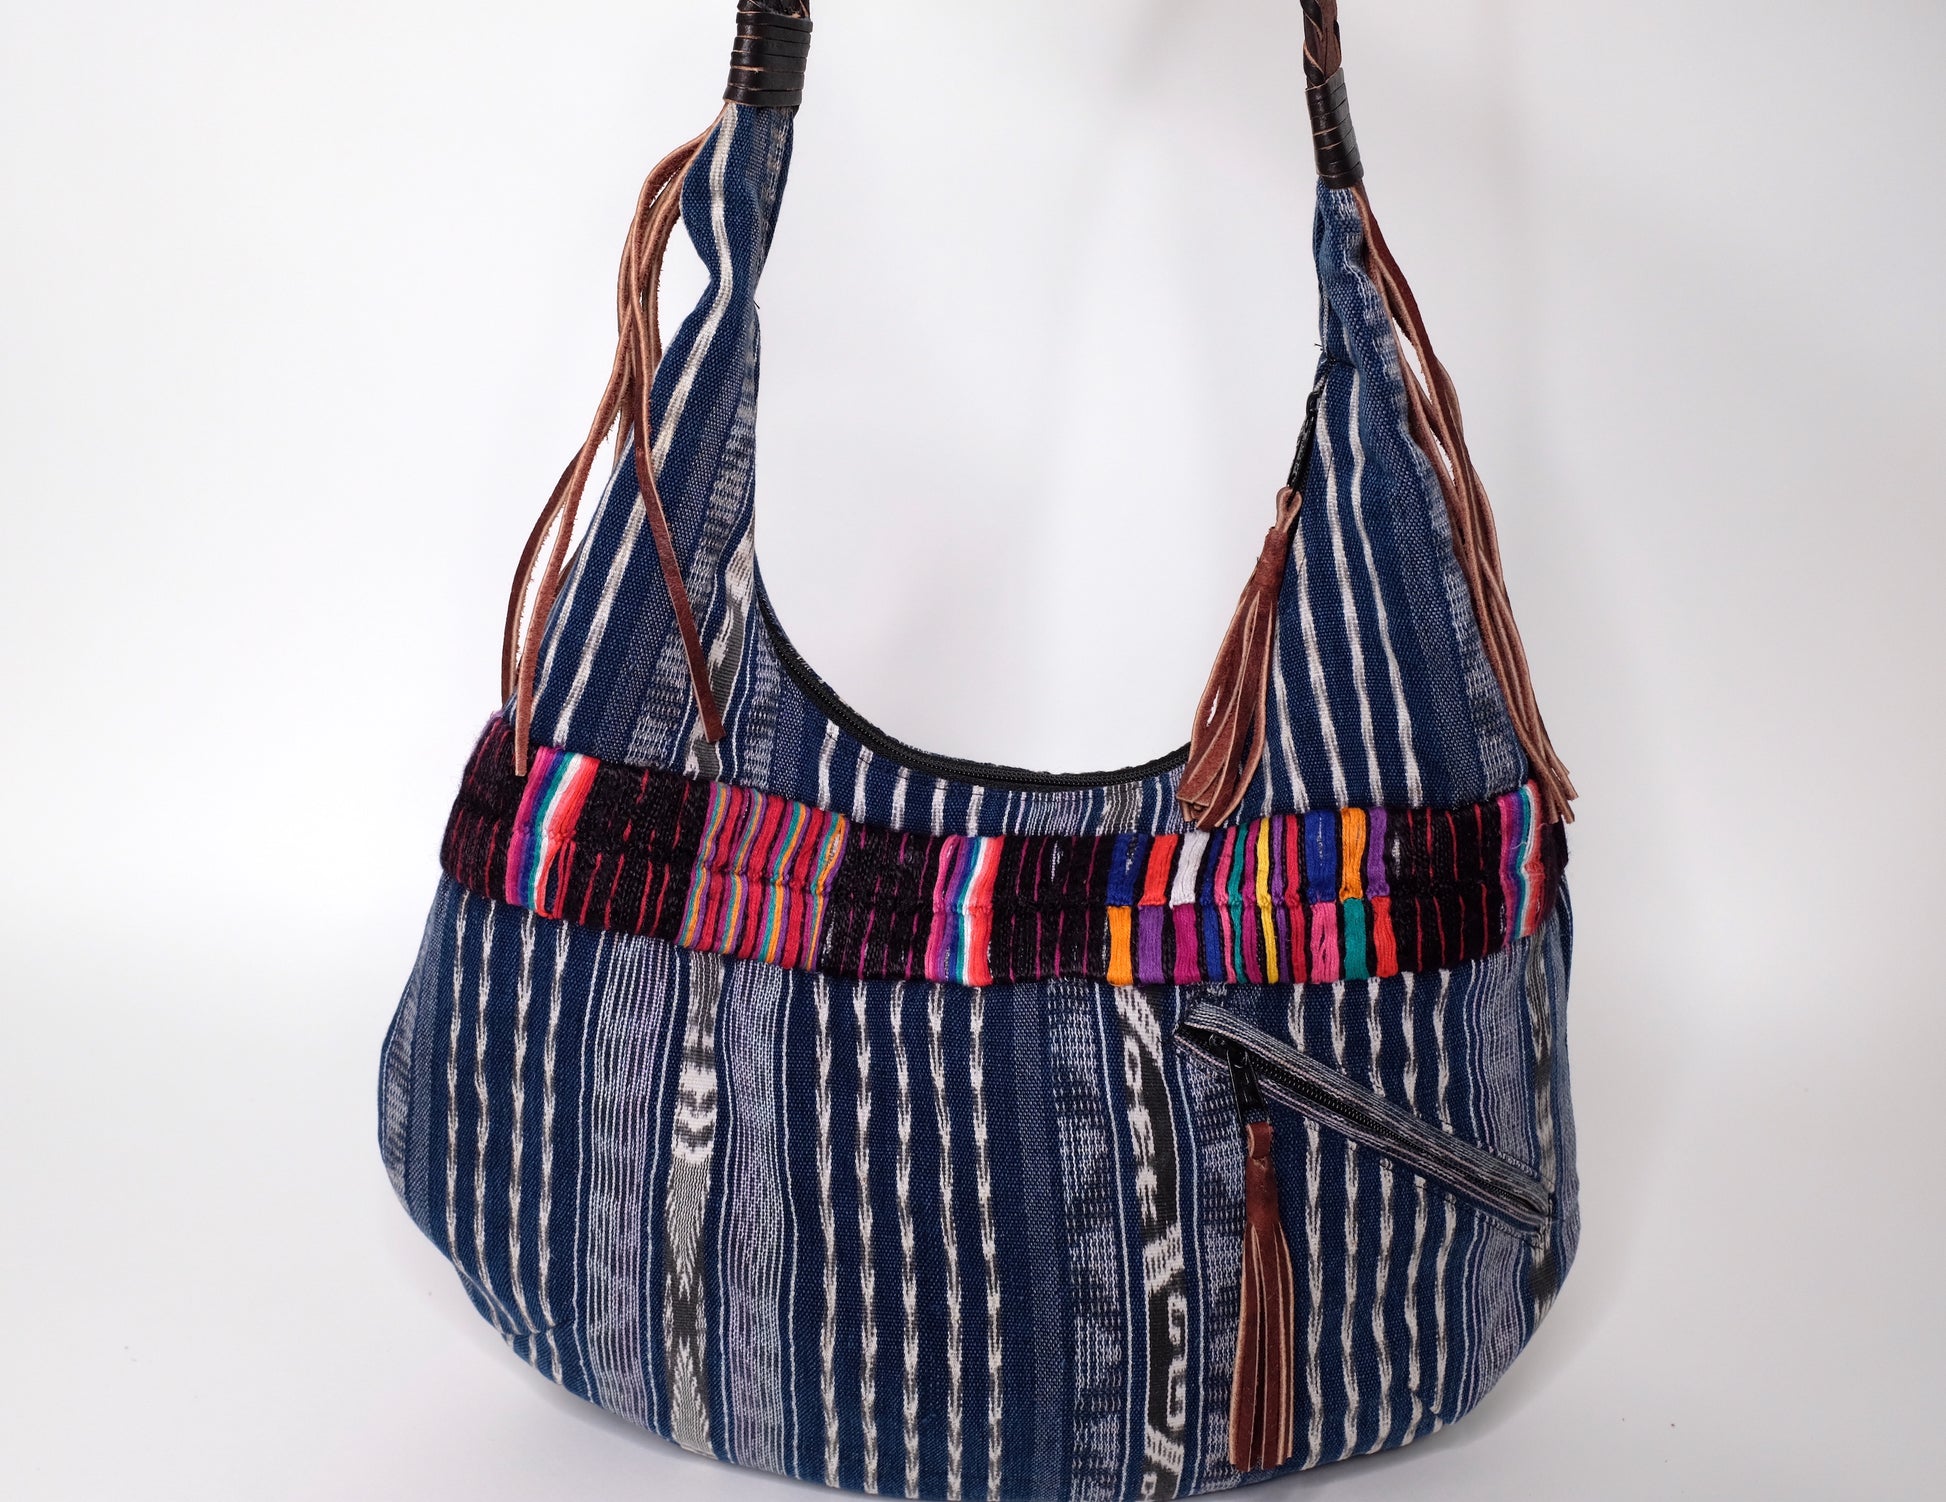 Blue handbag made with recycled Guatemala textiles, embroidery and leather fringe.